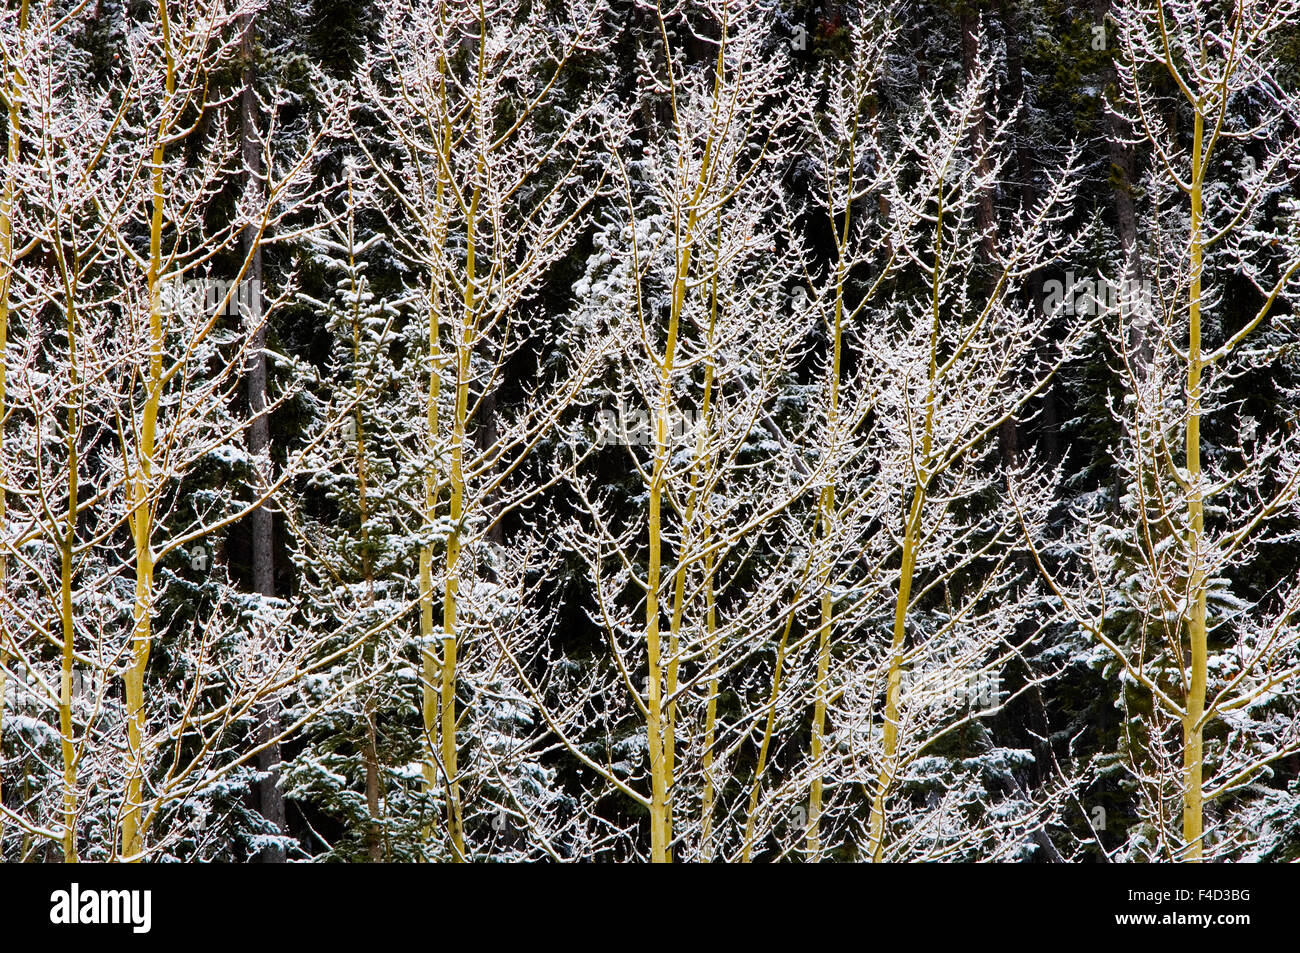 Canada, British Columbia, Mt. Robson Provincial Park. Hoarfrost on aspen trees. Credit as: Mike Grandmaison / Jaynes Gallery / DanitaDelimont.com Stock Photo